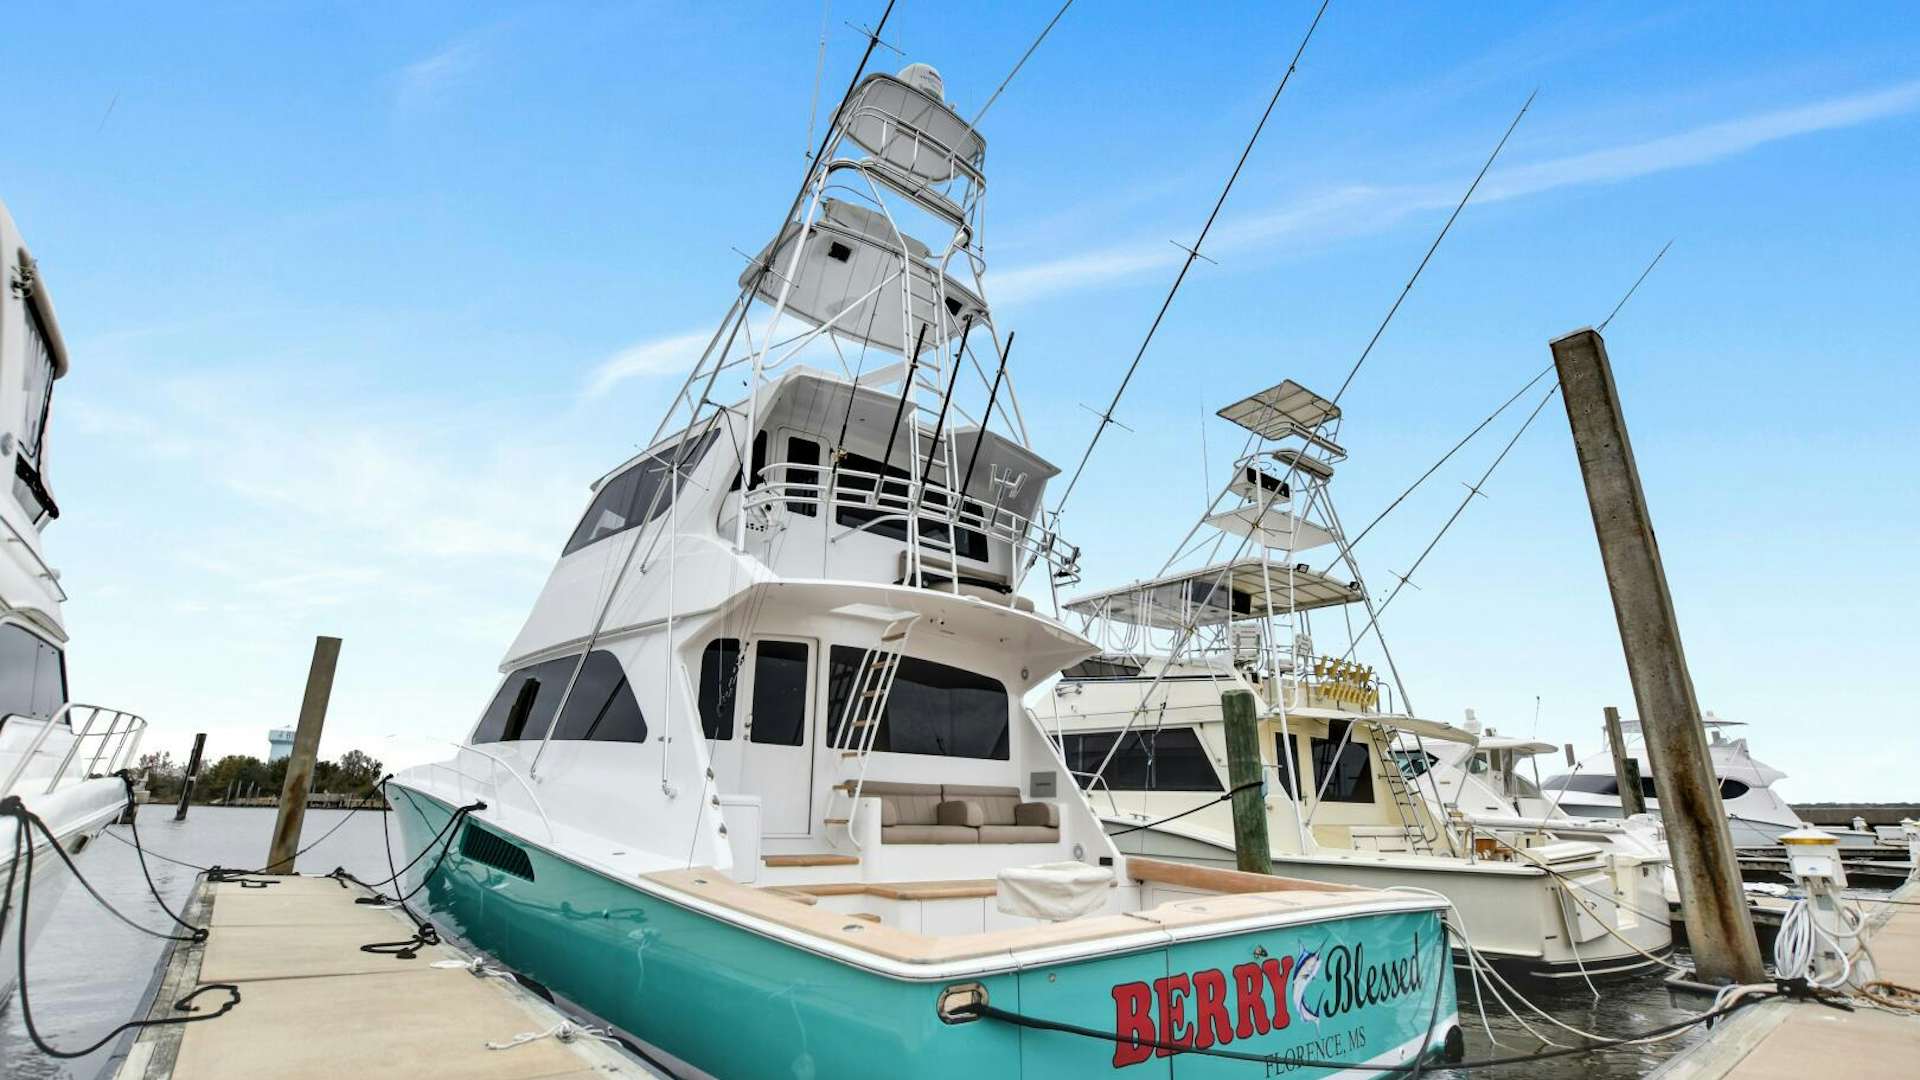 Berry blessed
Yacht for Sale